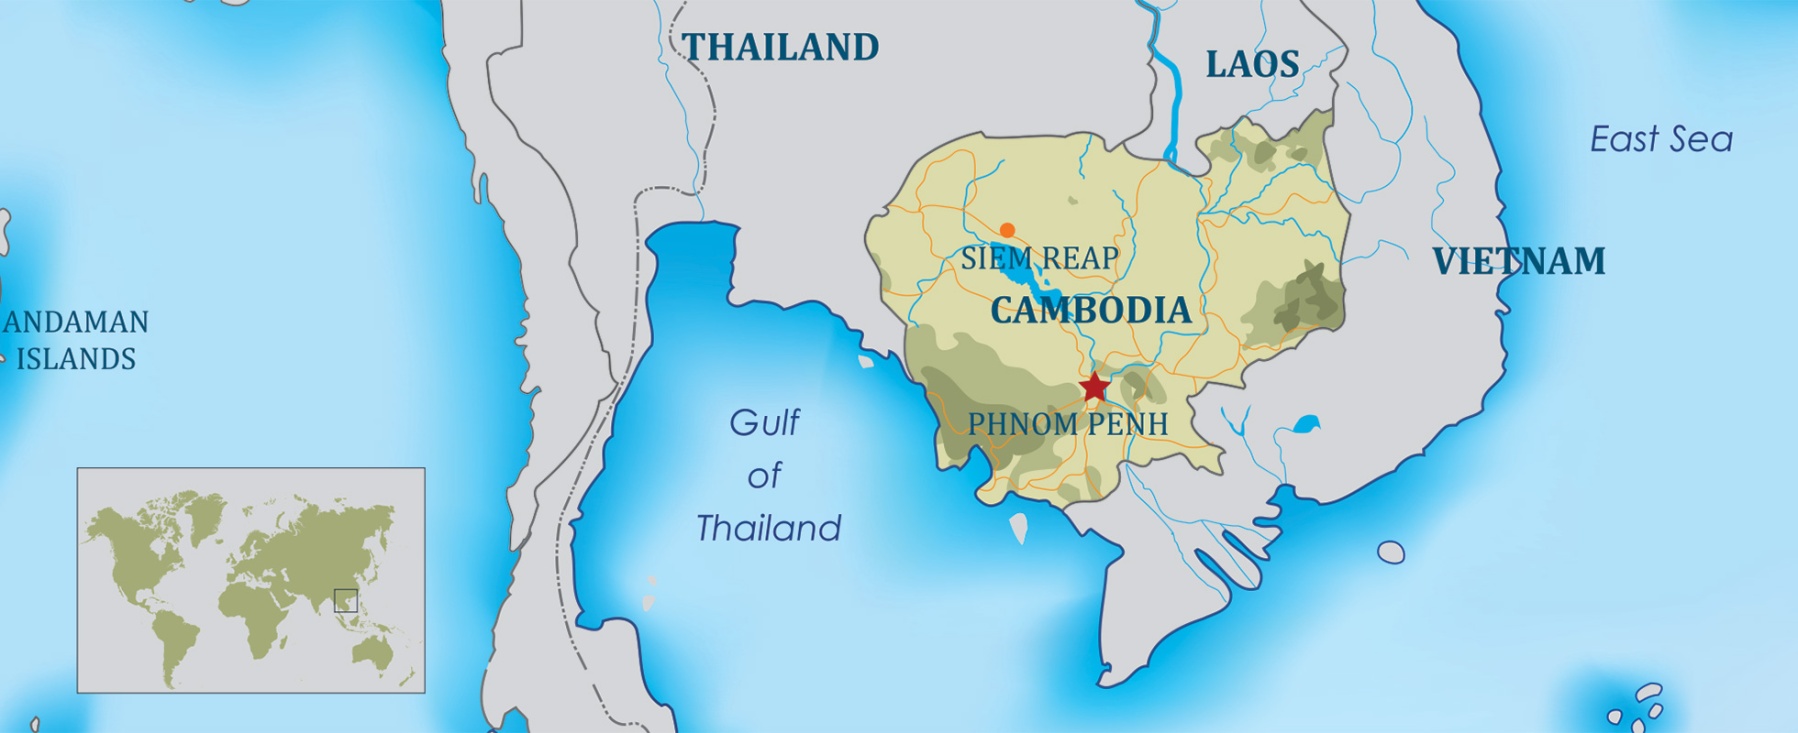 https://perceptionrevised.files.wordpress.com/2018/06/cambodia-map-for-introduction.jpg?w=1798